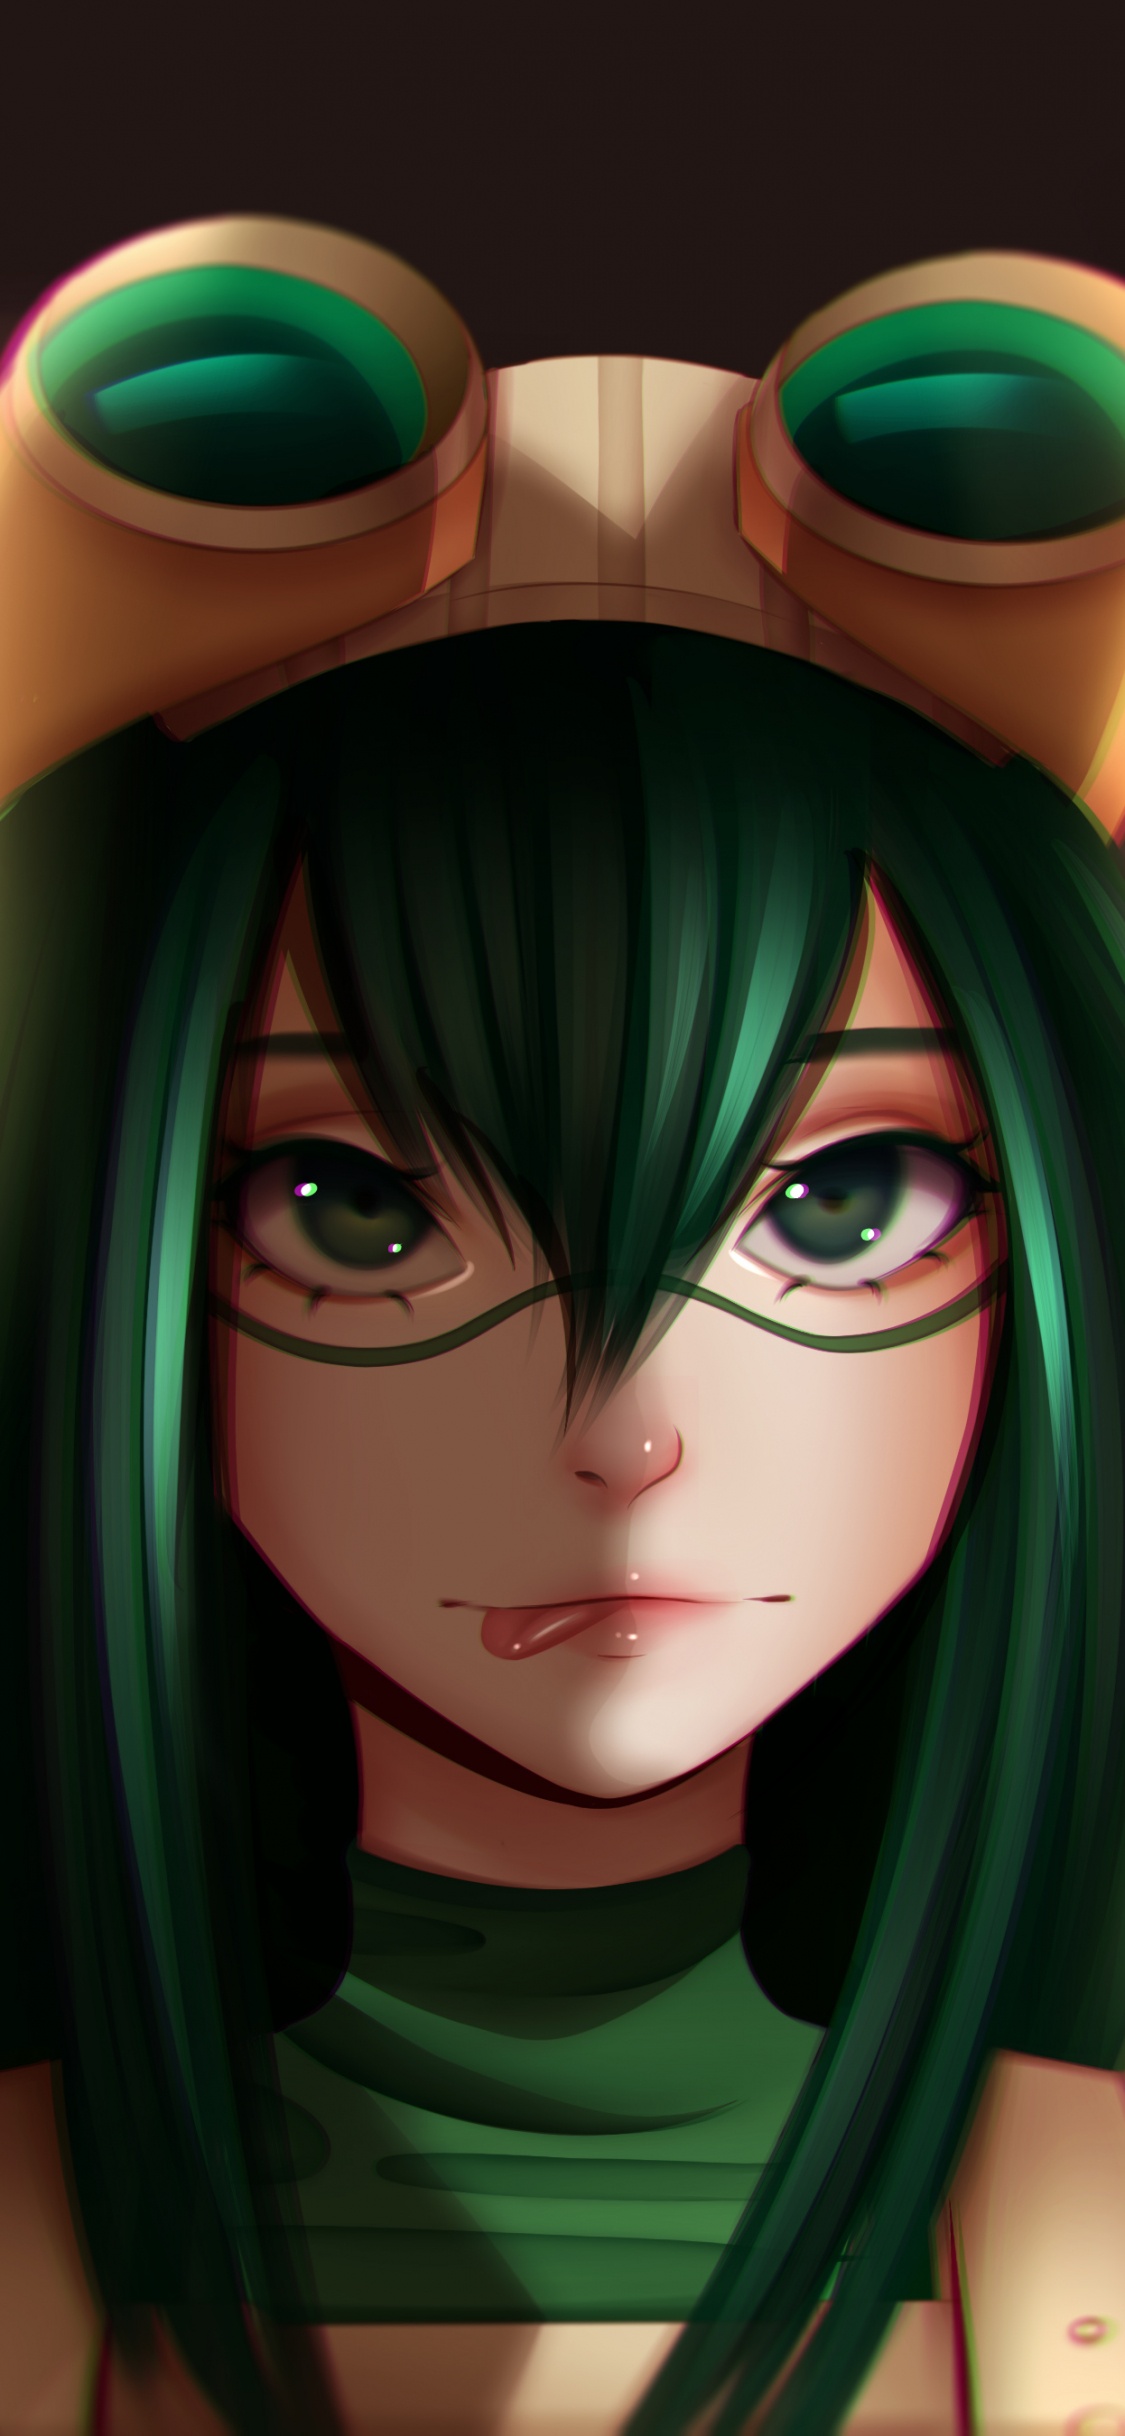 Green Haired Female Anime Character. Wallpaper in 1125x2436 Resolution